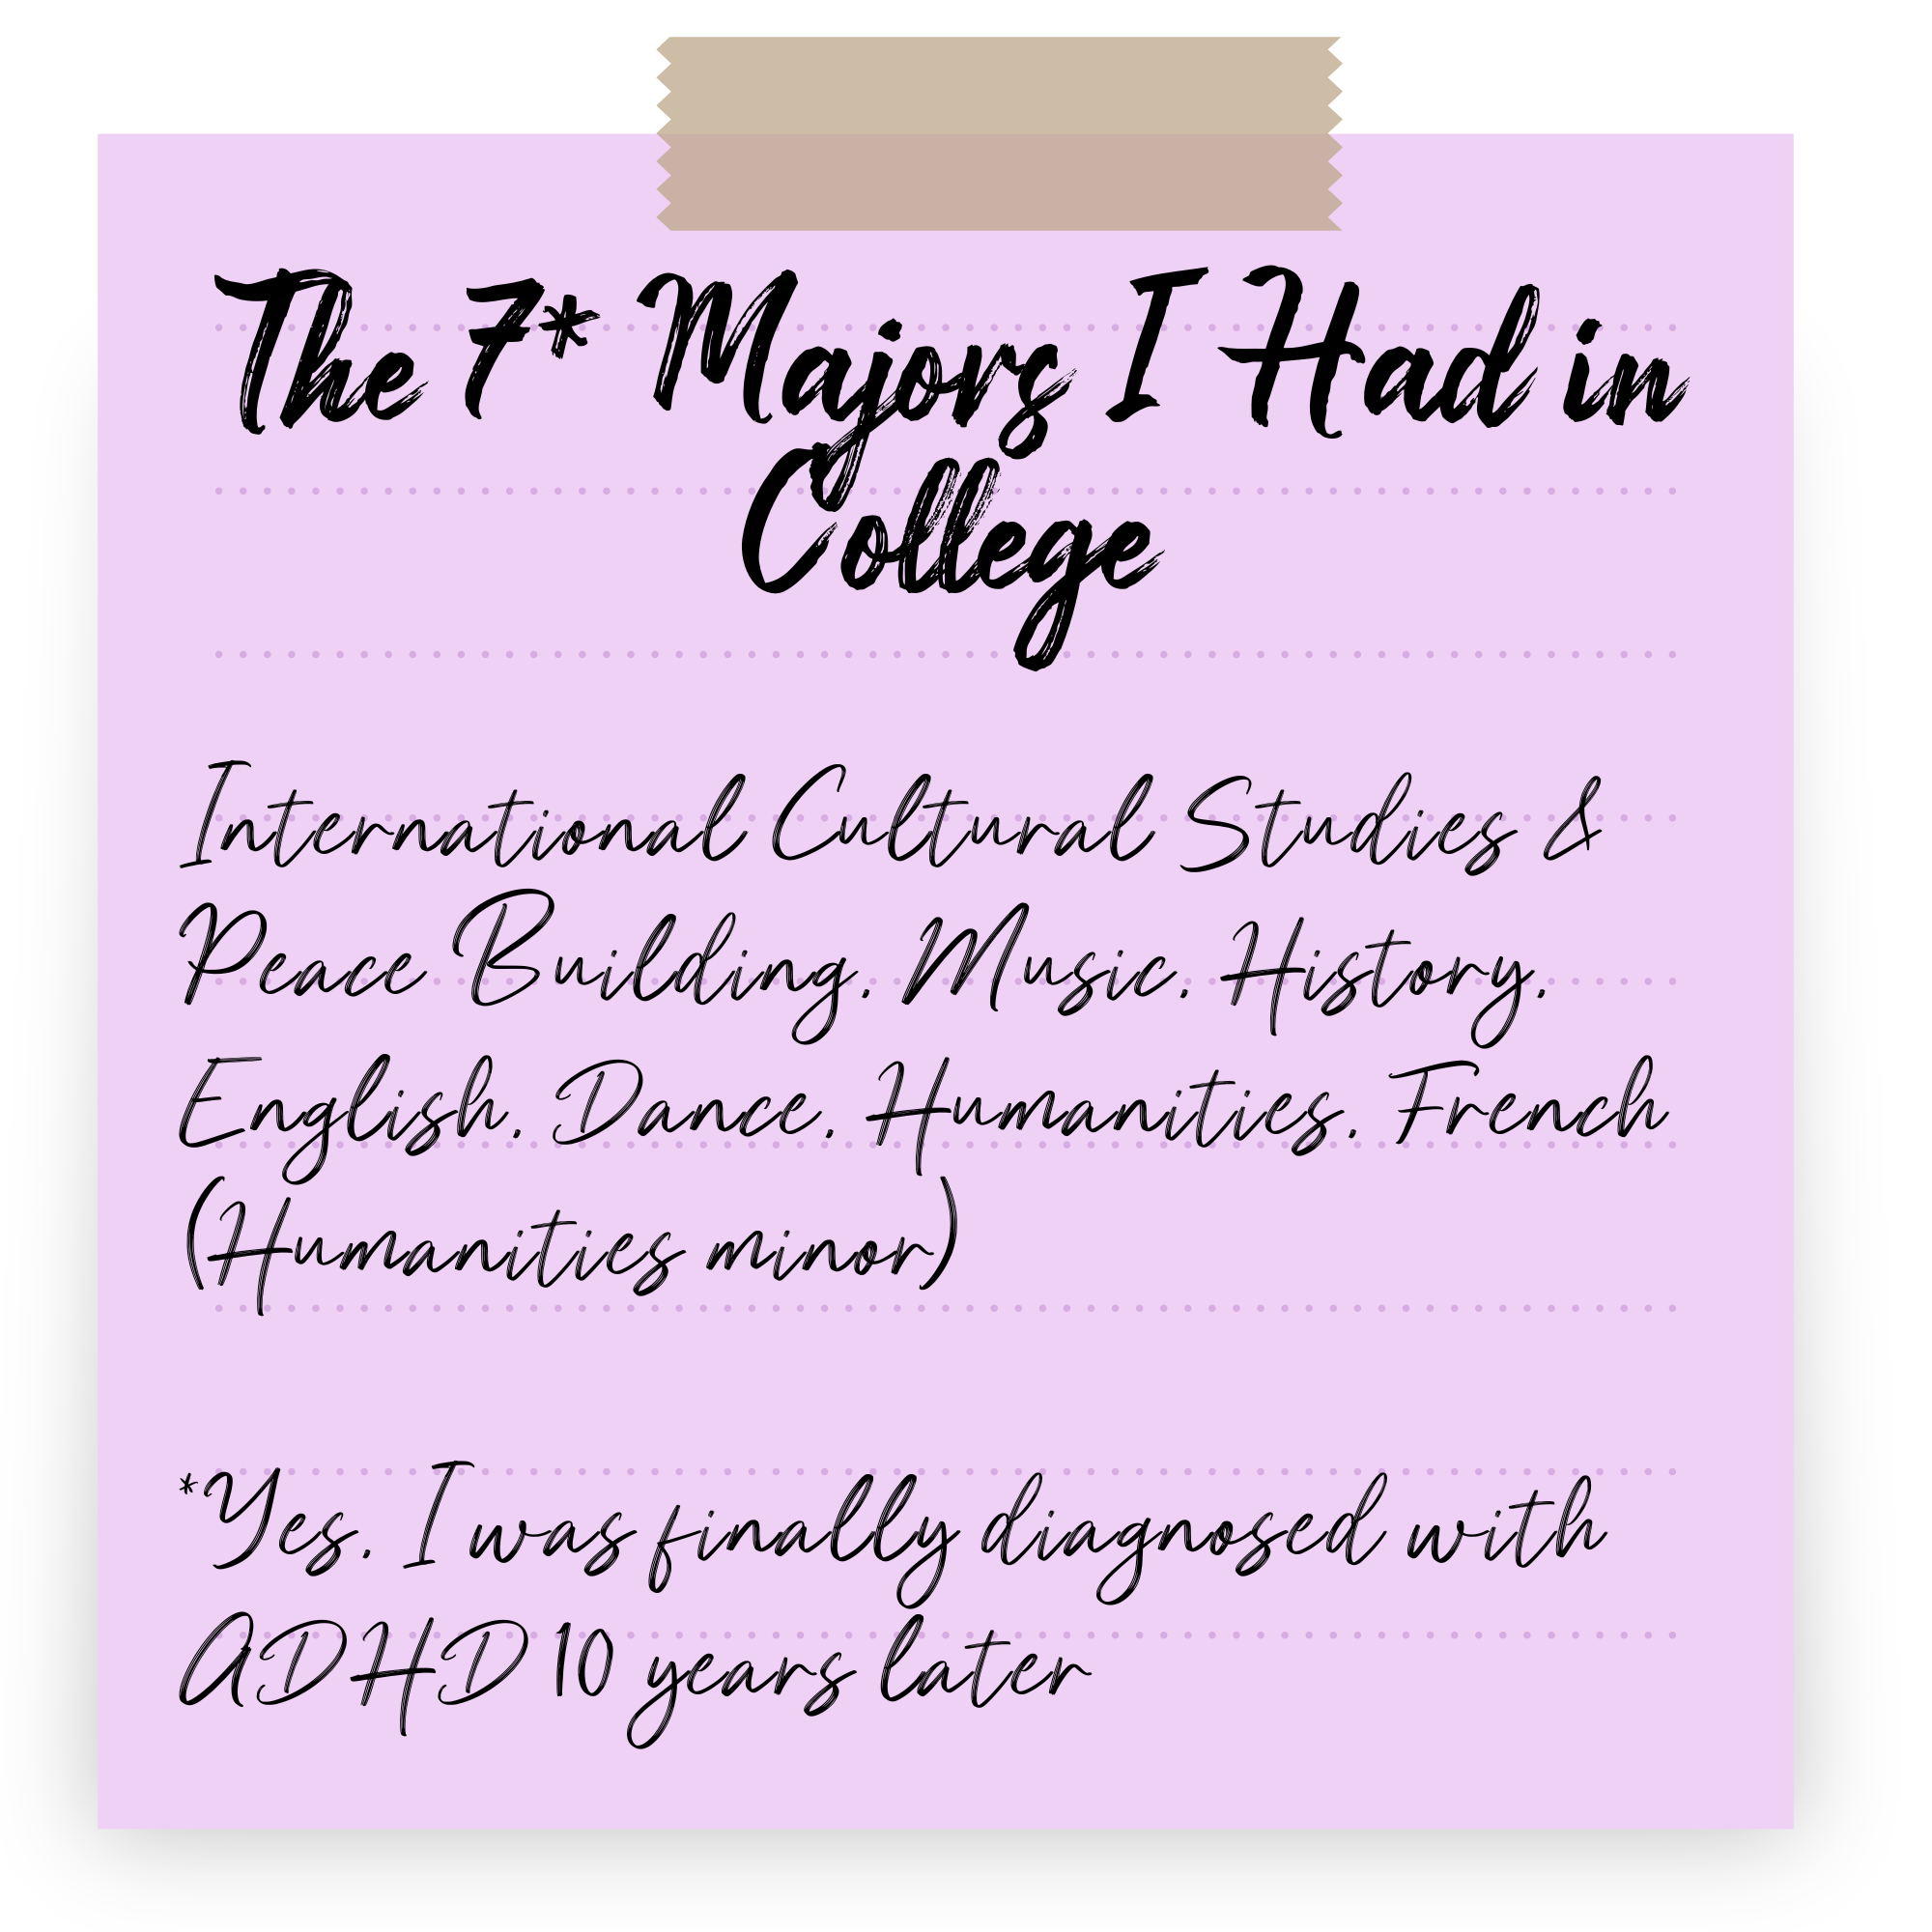 The 7* Majors I Had in College</p>
<p>International Cultural Studies & Peace Building, Music, History, English, Dance, Humanities, French (Humanities minor)</p>
<p>*Yes, I was finally diagnosed with ADHD 10 years later